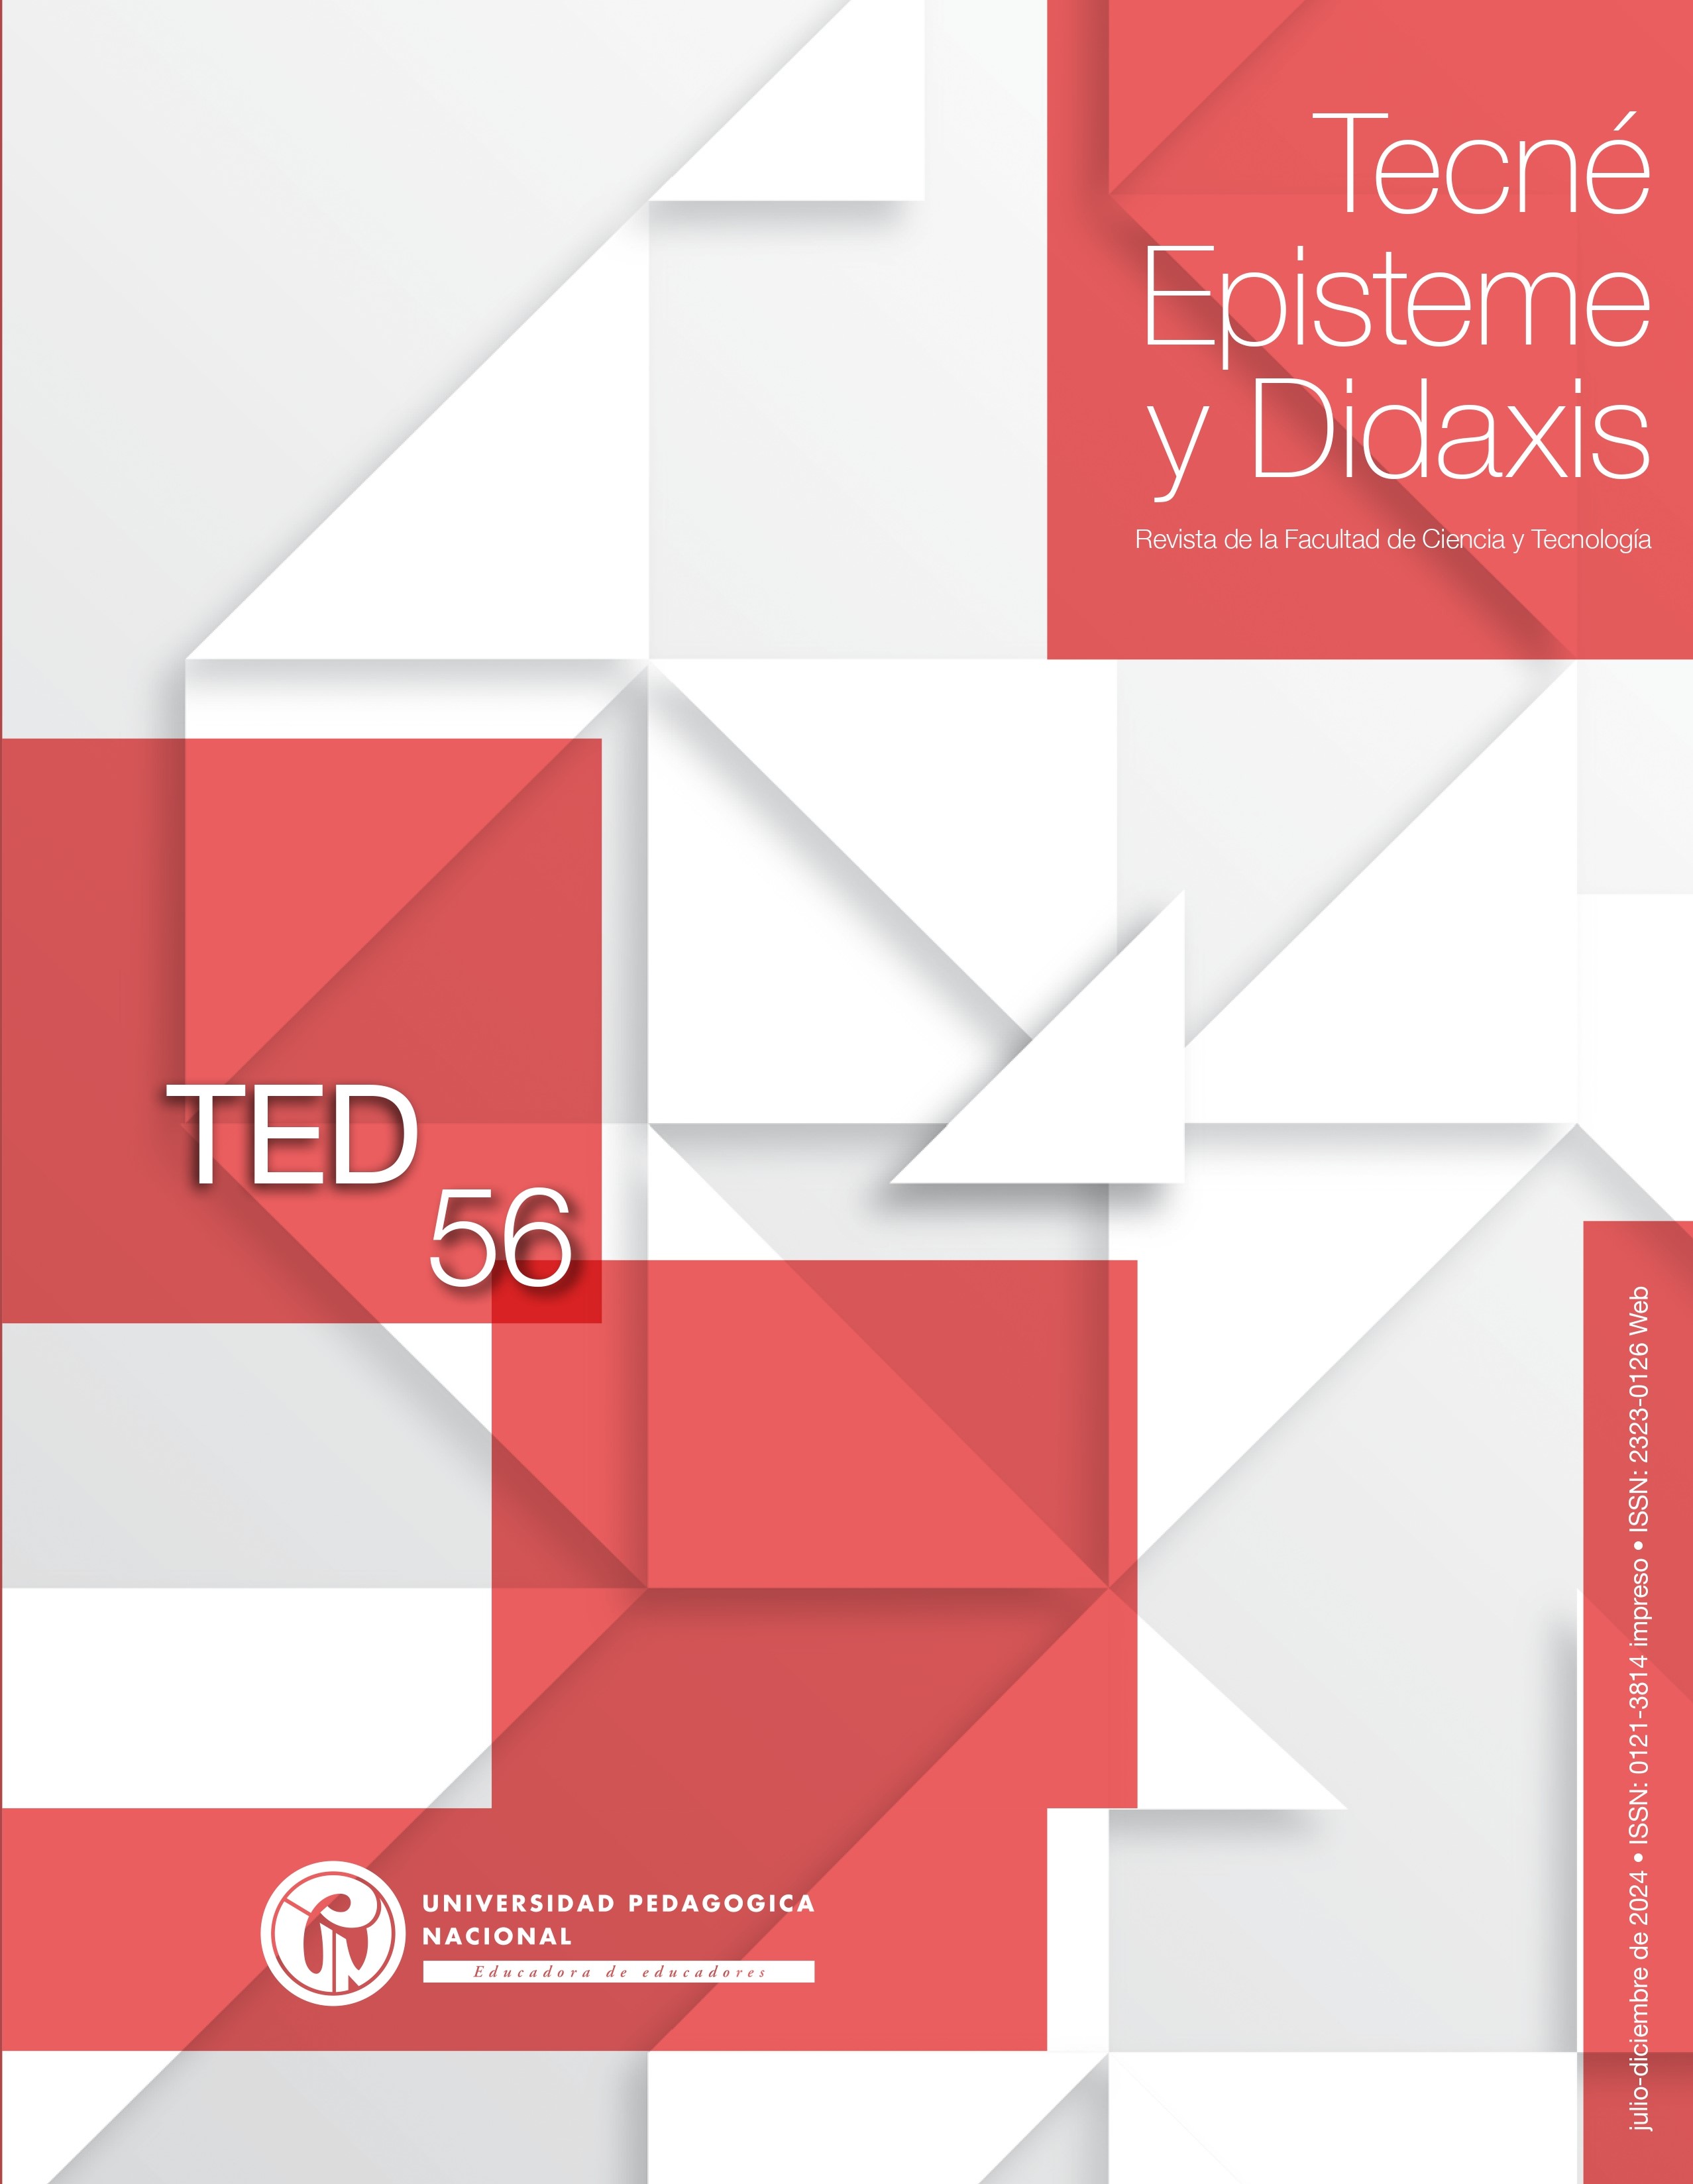 TED 56